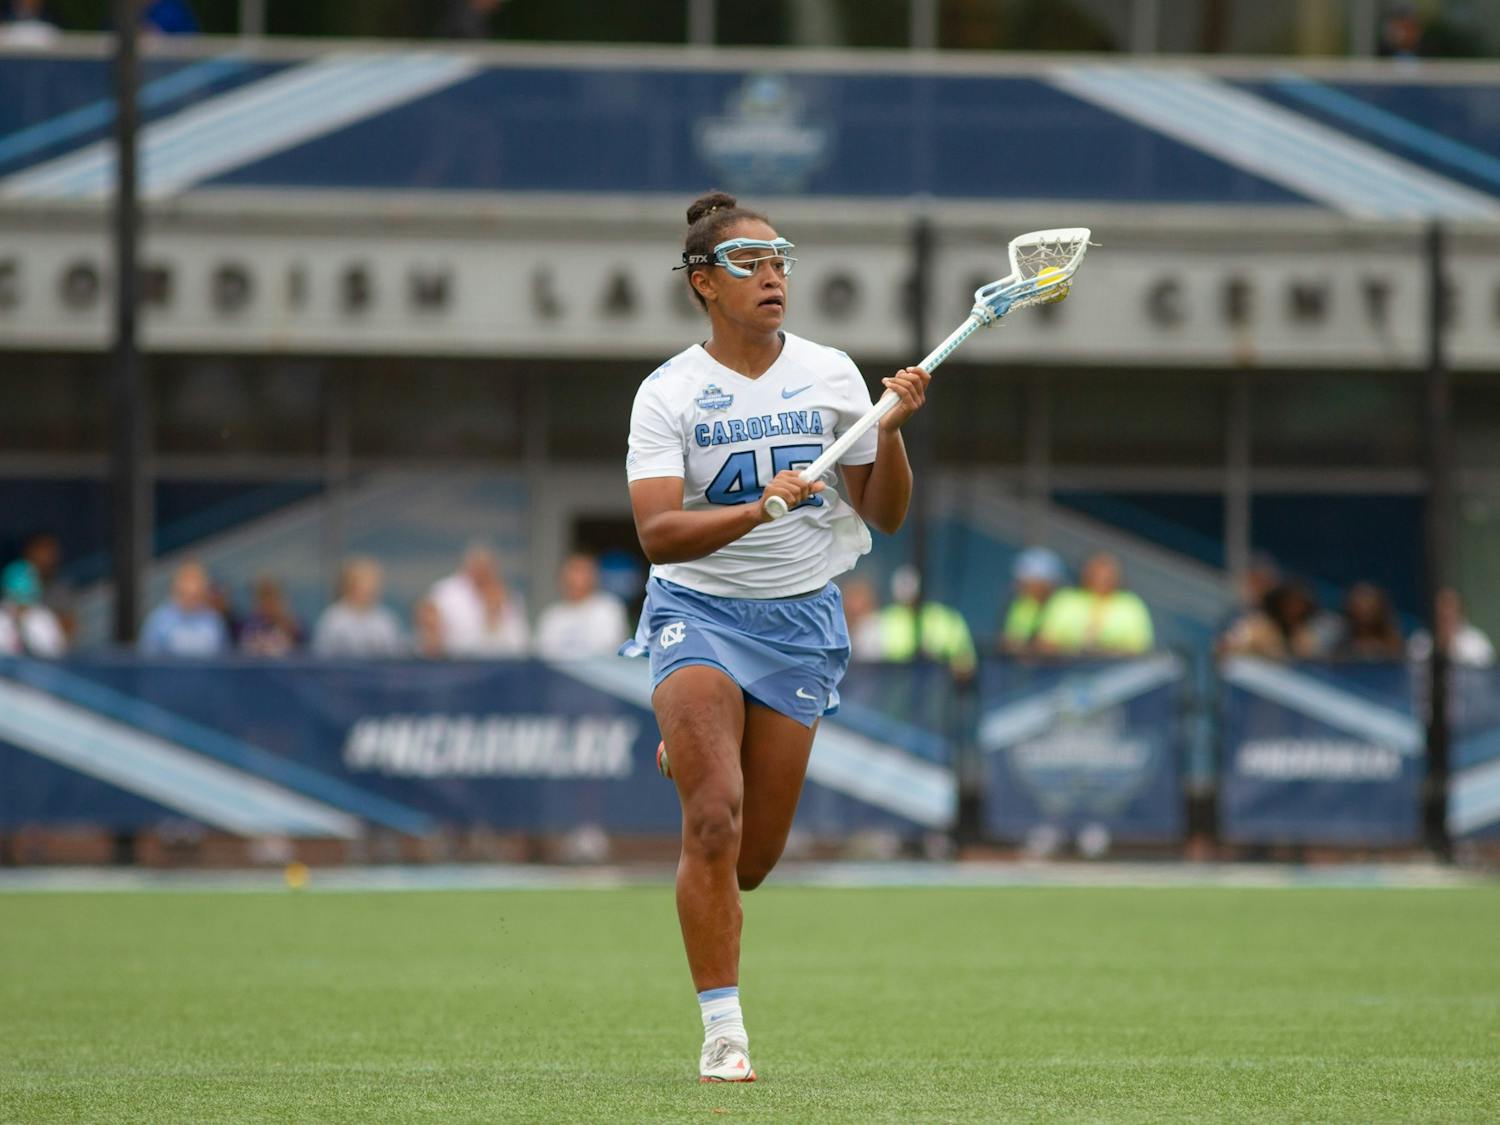 Freshman defender Brooklyn Walker-Welch (45) cradles the ball up the field during UNC's NCAA Tournament semifinal match against Northwestern at Homewood Field in Baltimore, M.D. on May 27, 2022. UNC won 15-14.